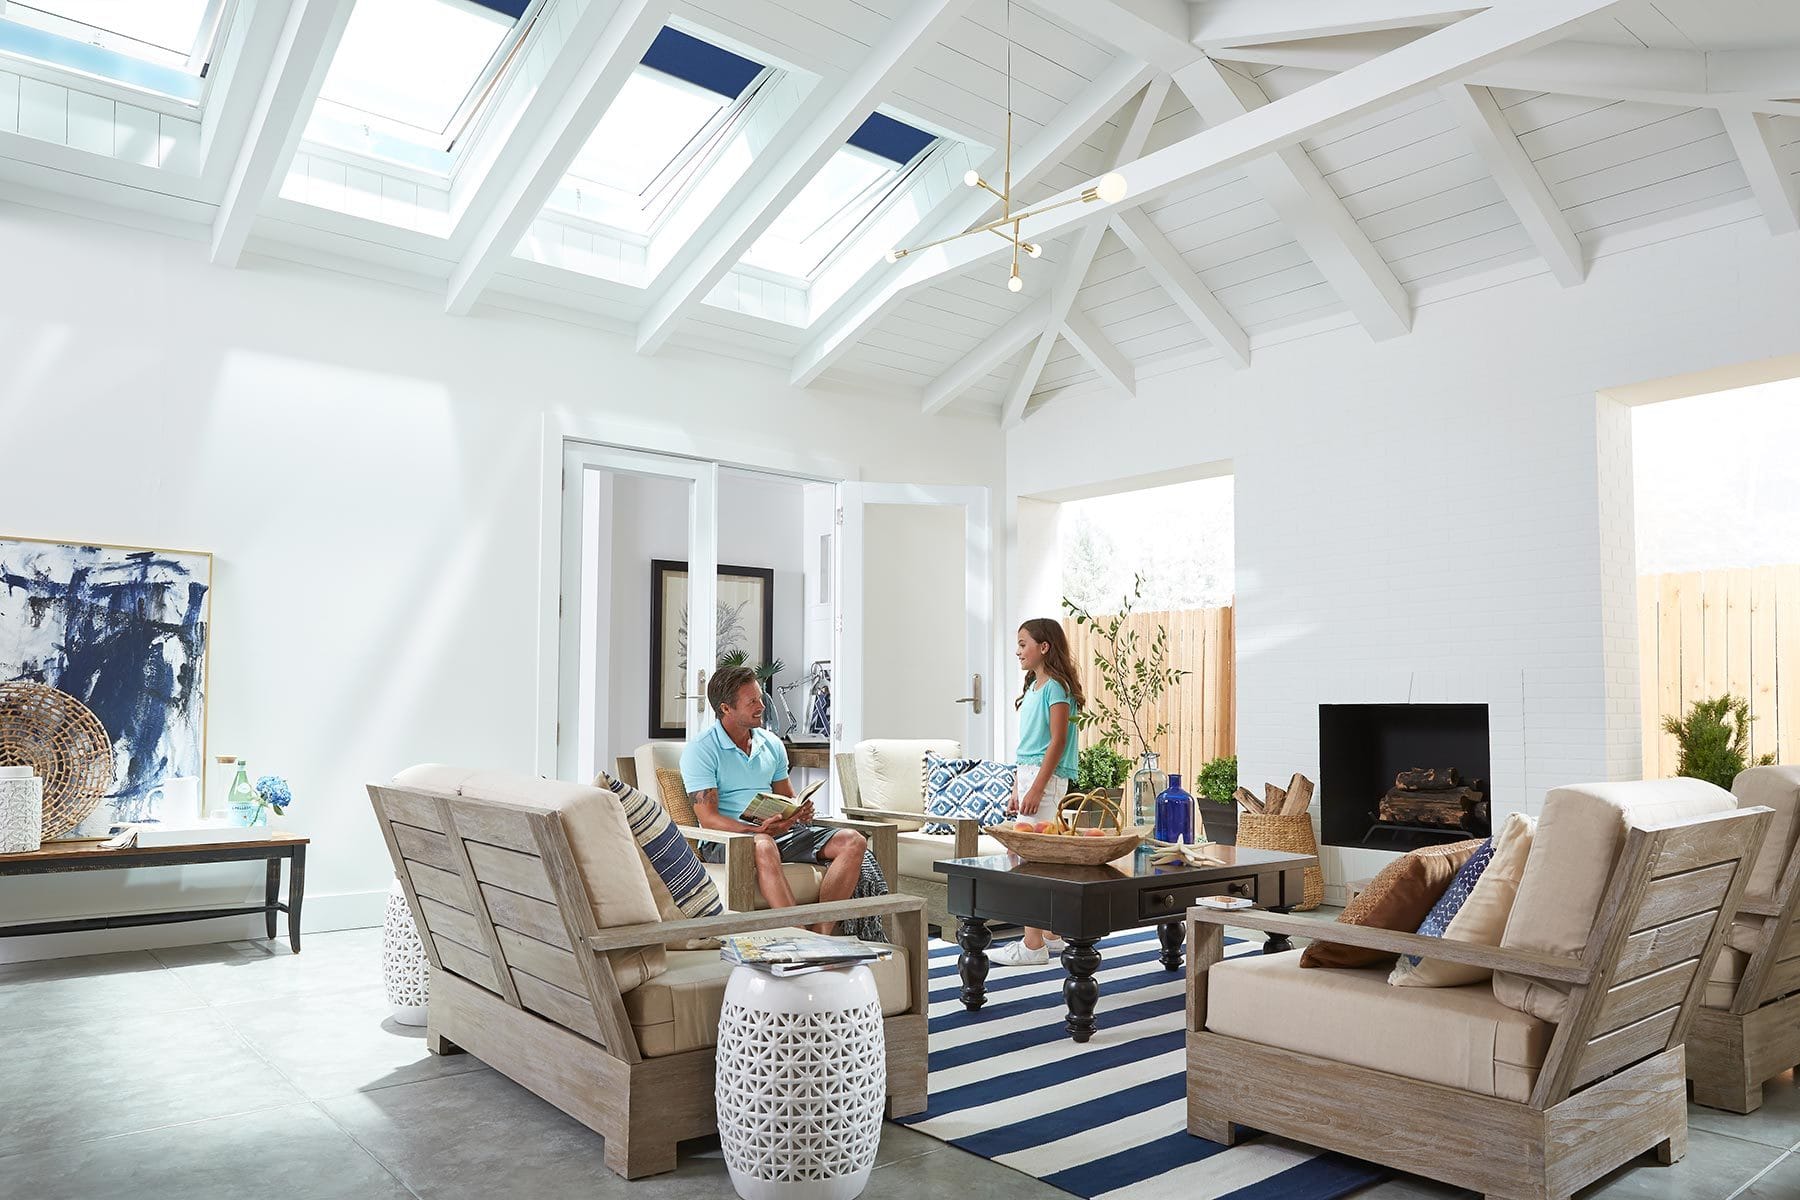 Father and daughter sitting in a white and blue living room with four skylights